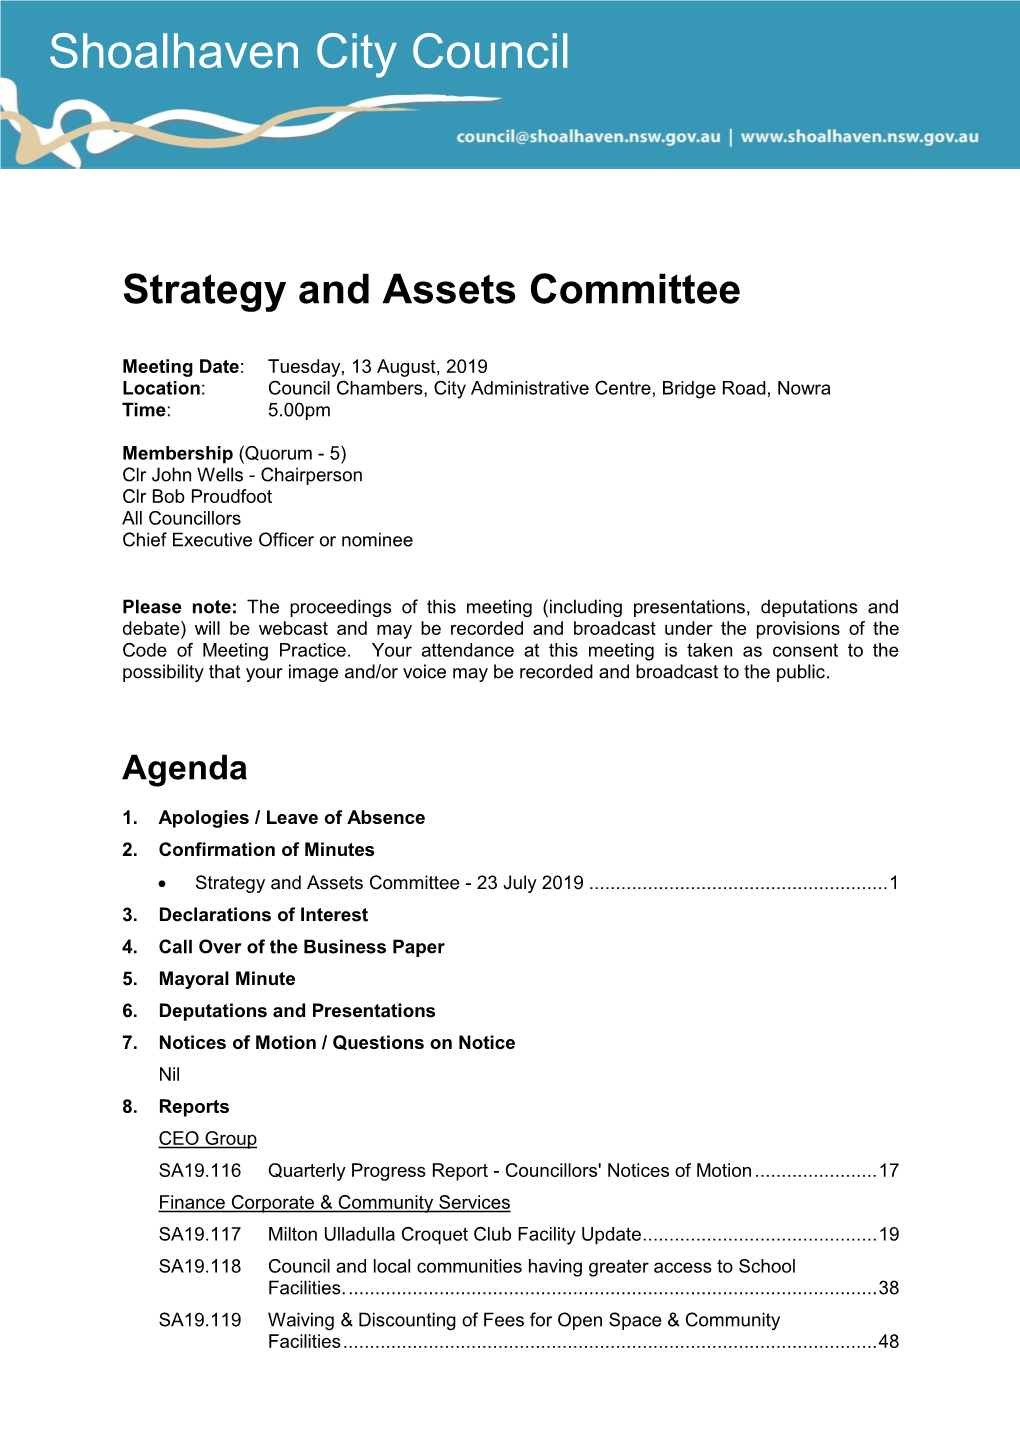 Agenda of Strategy and Assets Committee